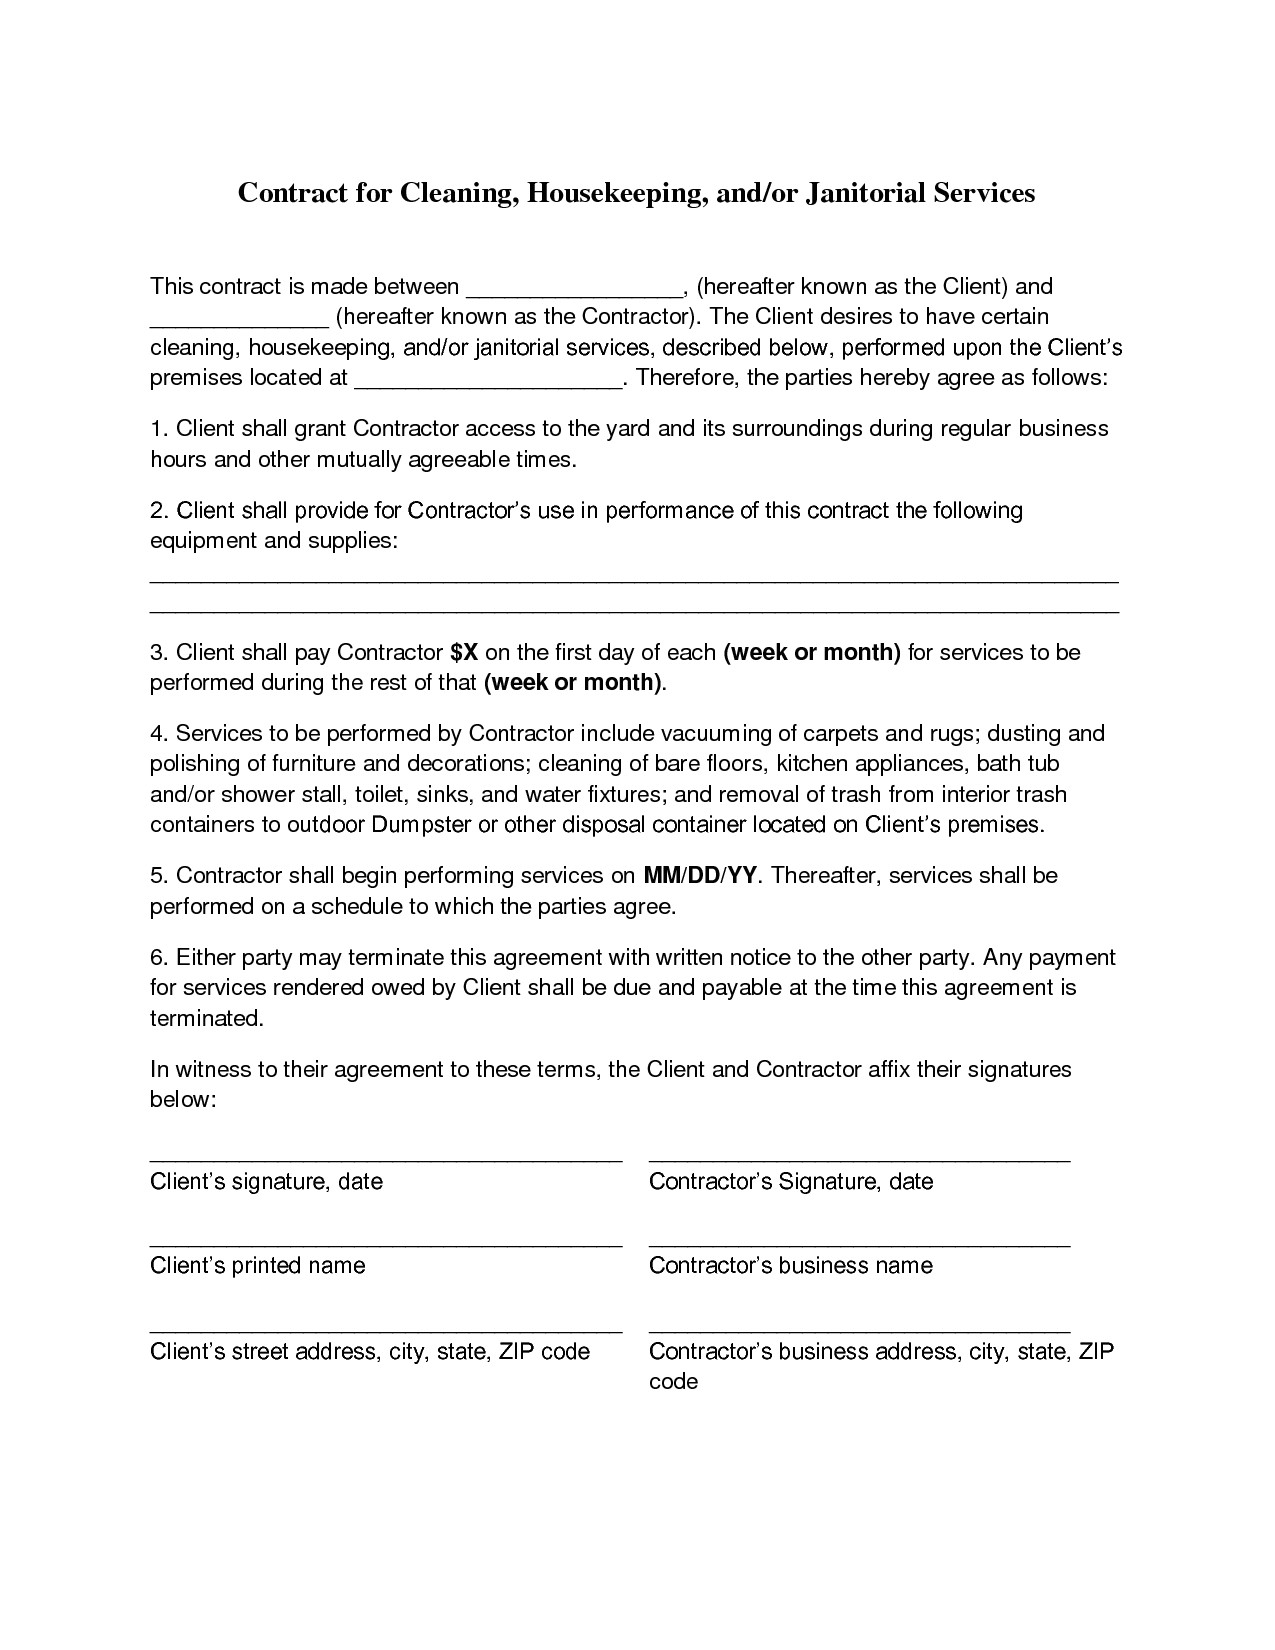 Self Employed Cleaner Contract Template Cleaning Contract Agreement Free Printable Documents